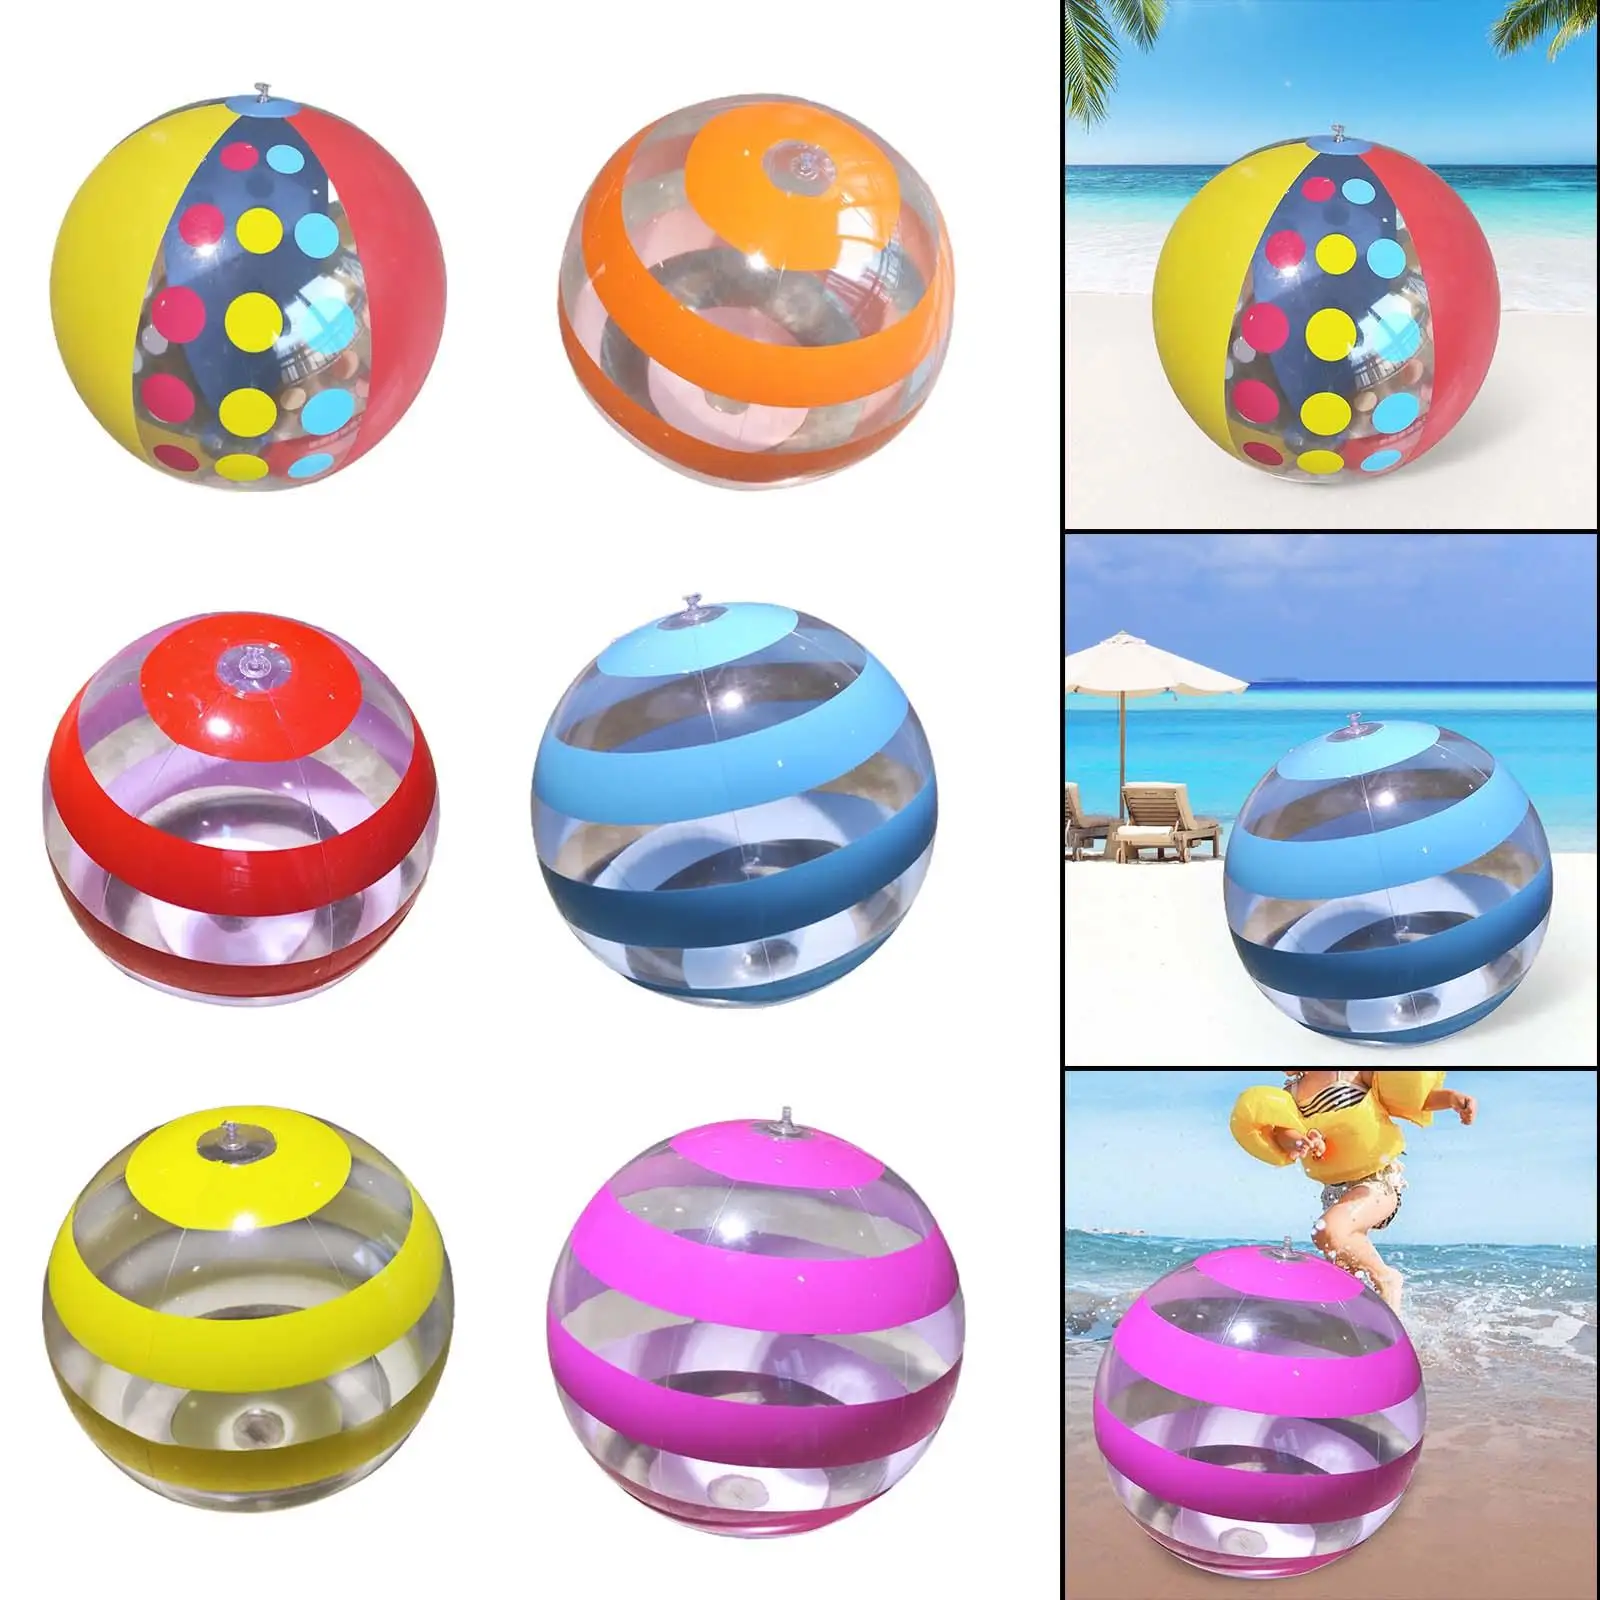 Swimming Pool Balls PVC Pool Water Games Toys Inflatable Pool Toys Blow Balls for Holiday Lake Hawaiian Theme Party Yard